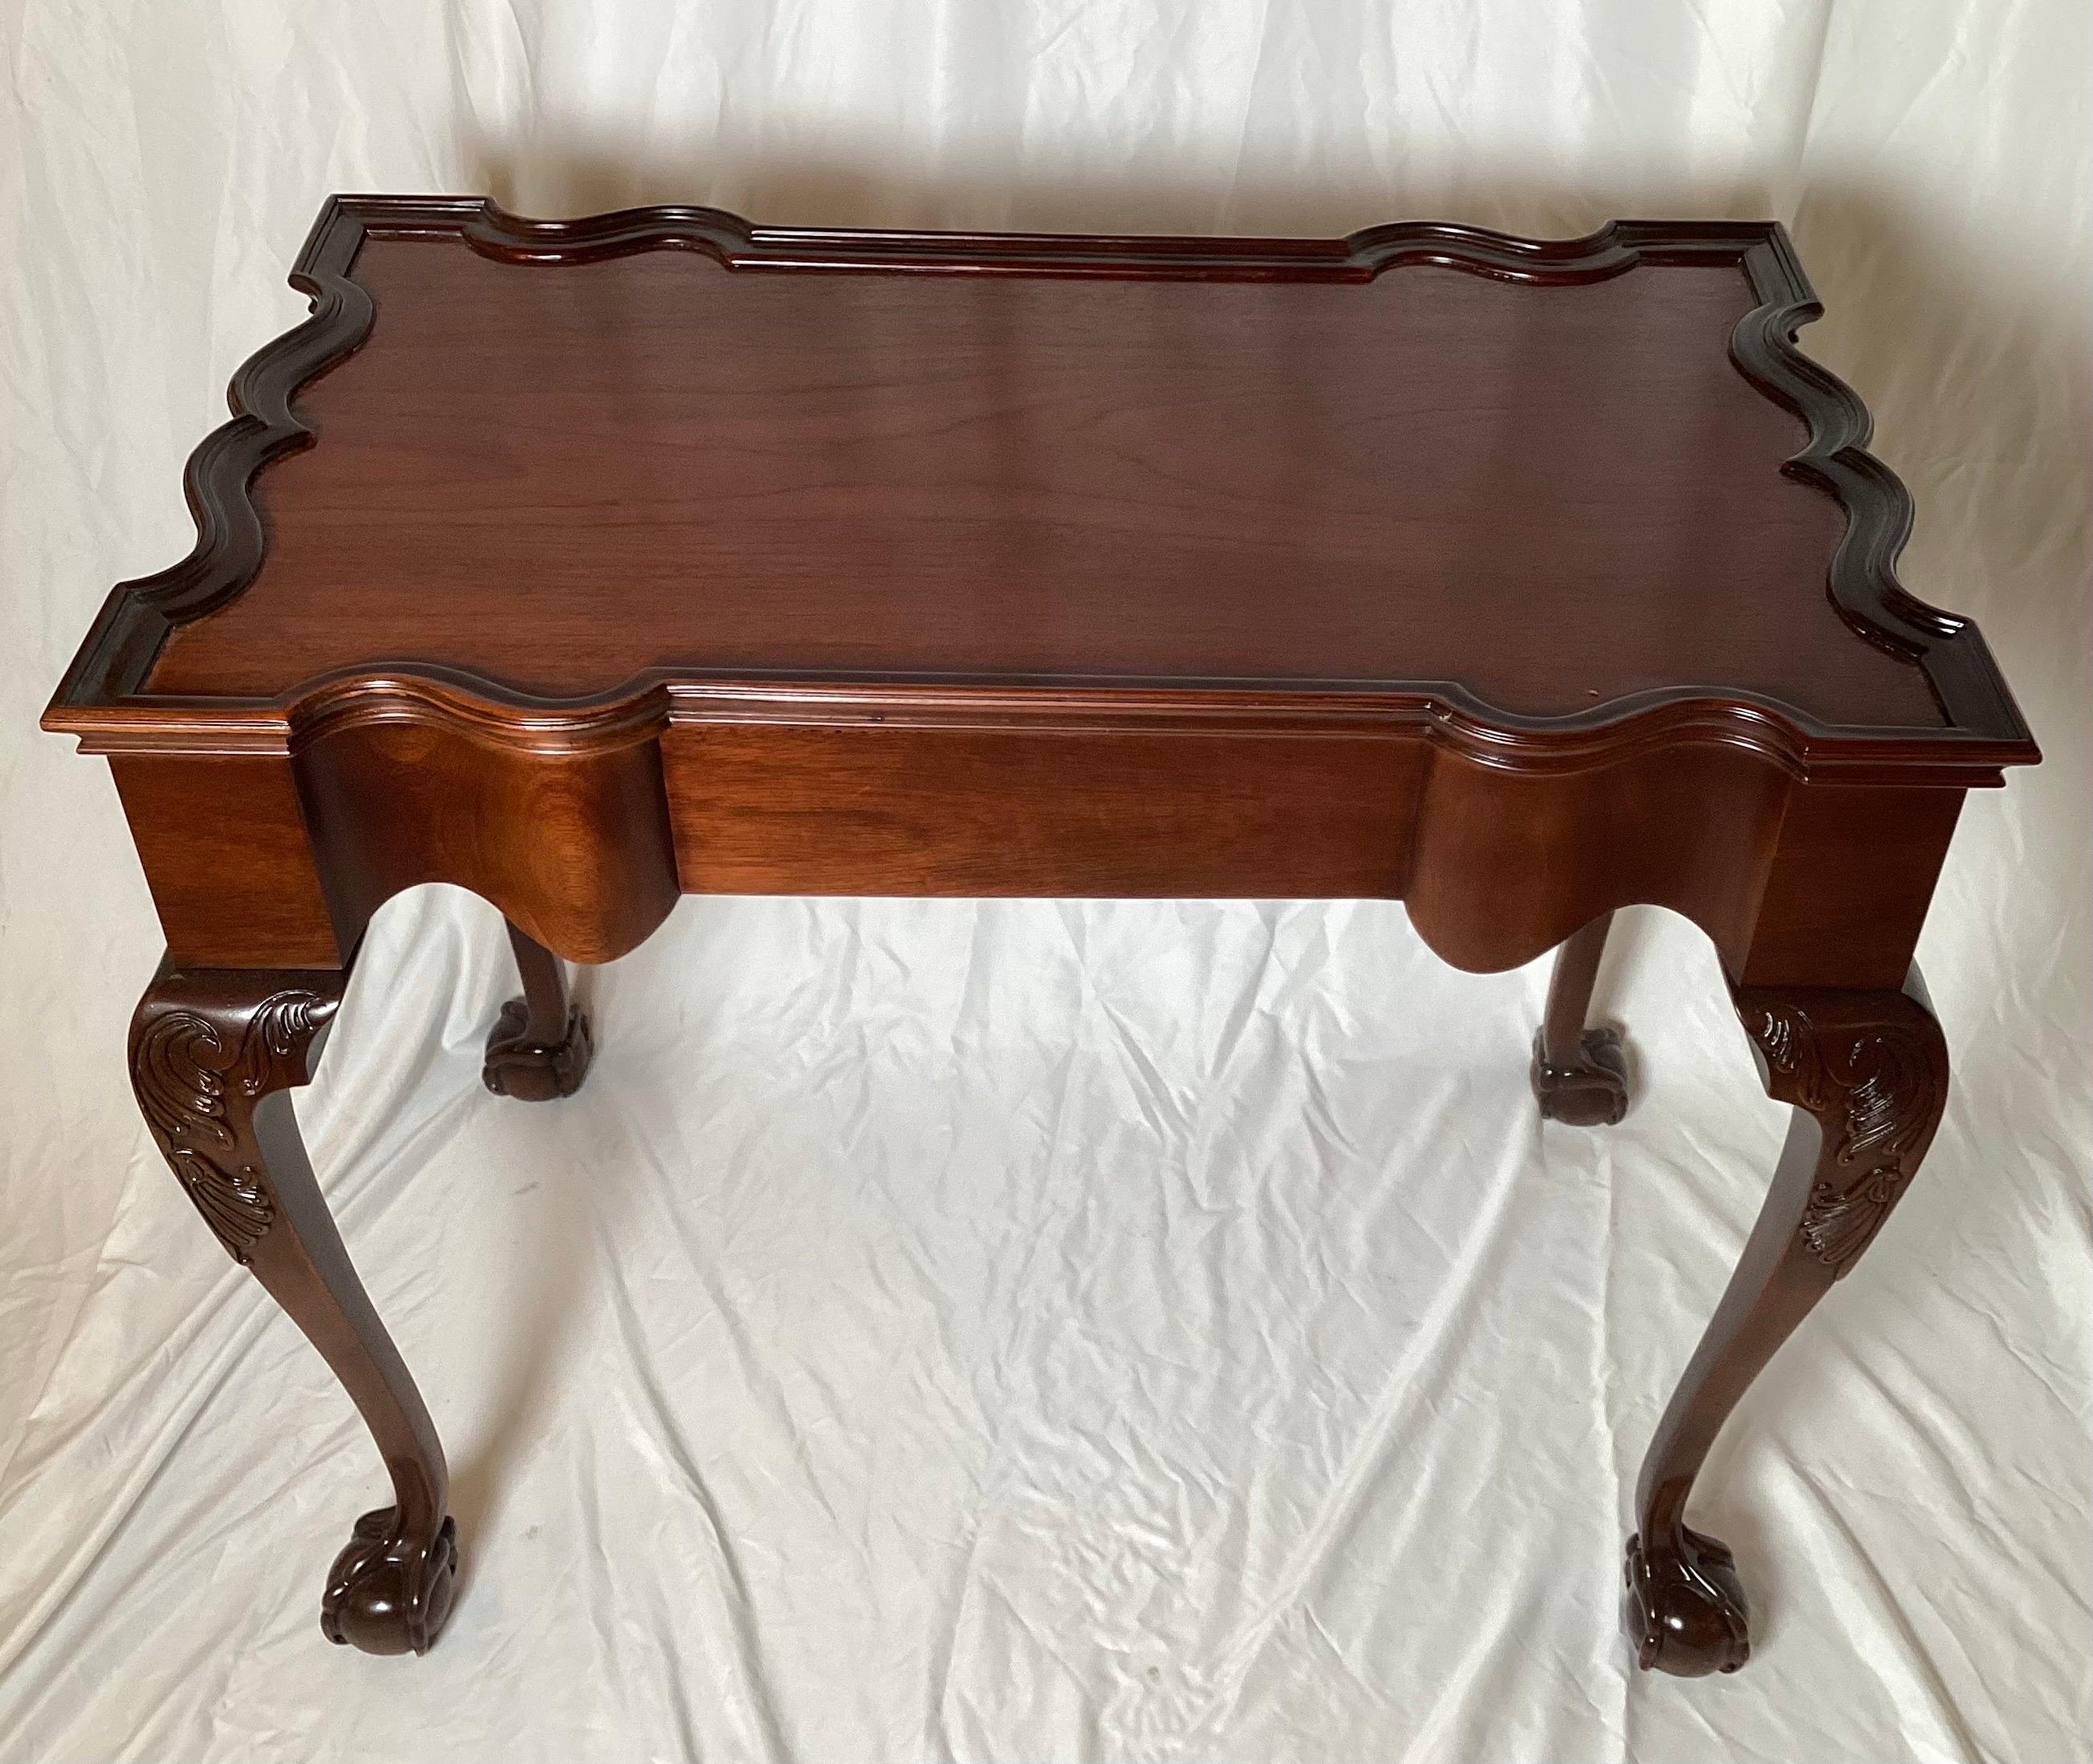 A beautiful reproduction tea table of the famous Newport Rhode Island John Goddard rectangular pie crust edge table. Elegant shape and proportions with the classic carved legs with ball and claw feet with the talon claw opening around the ball foot.